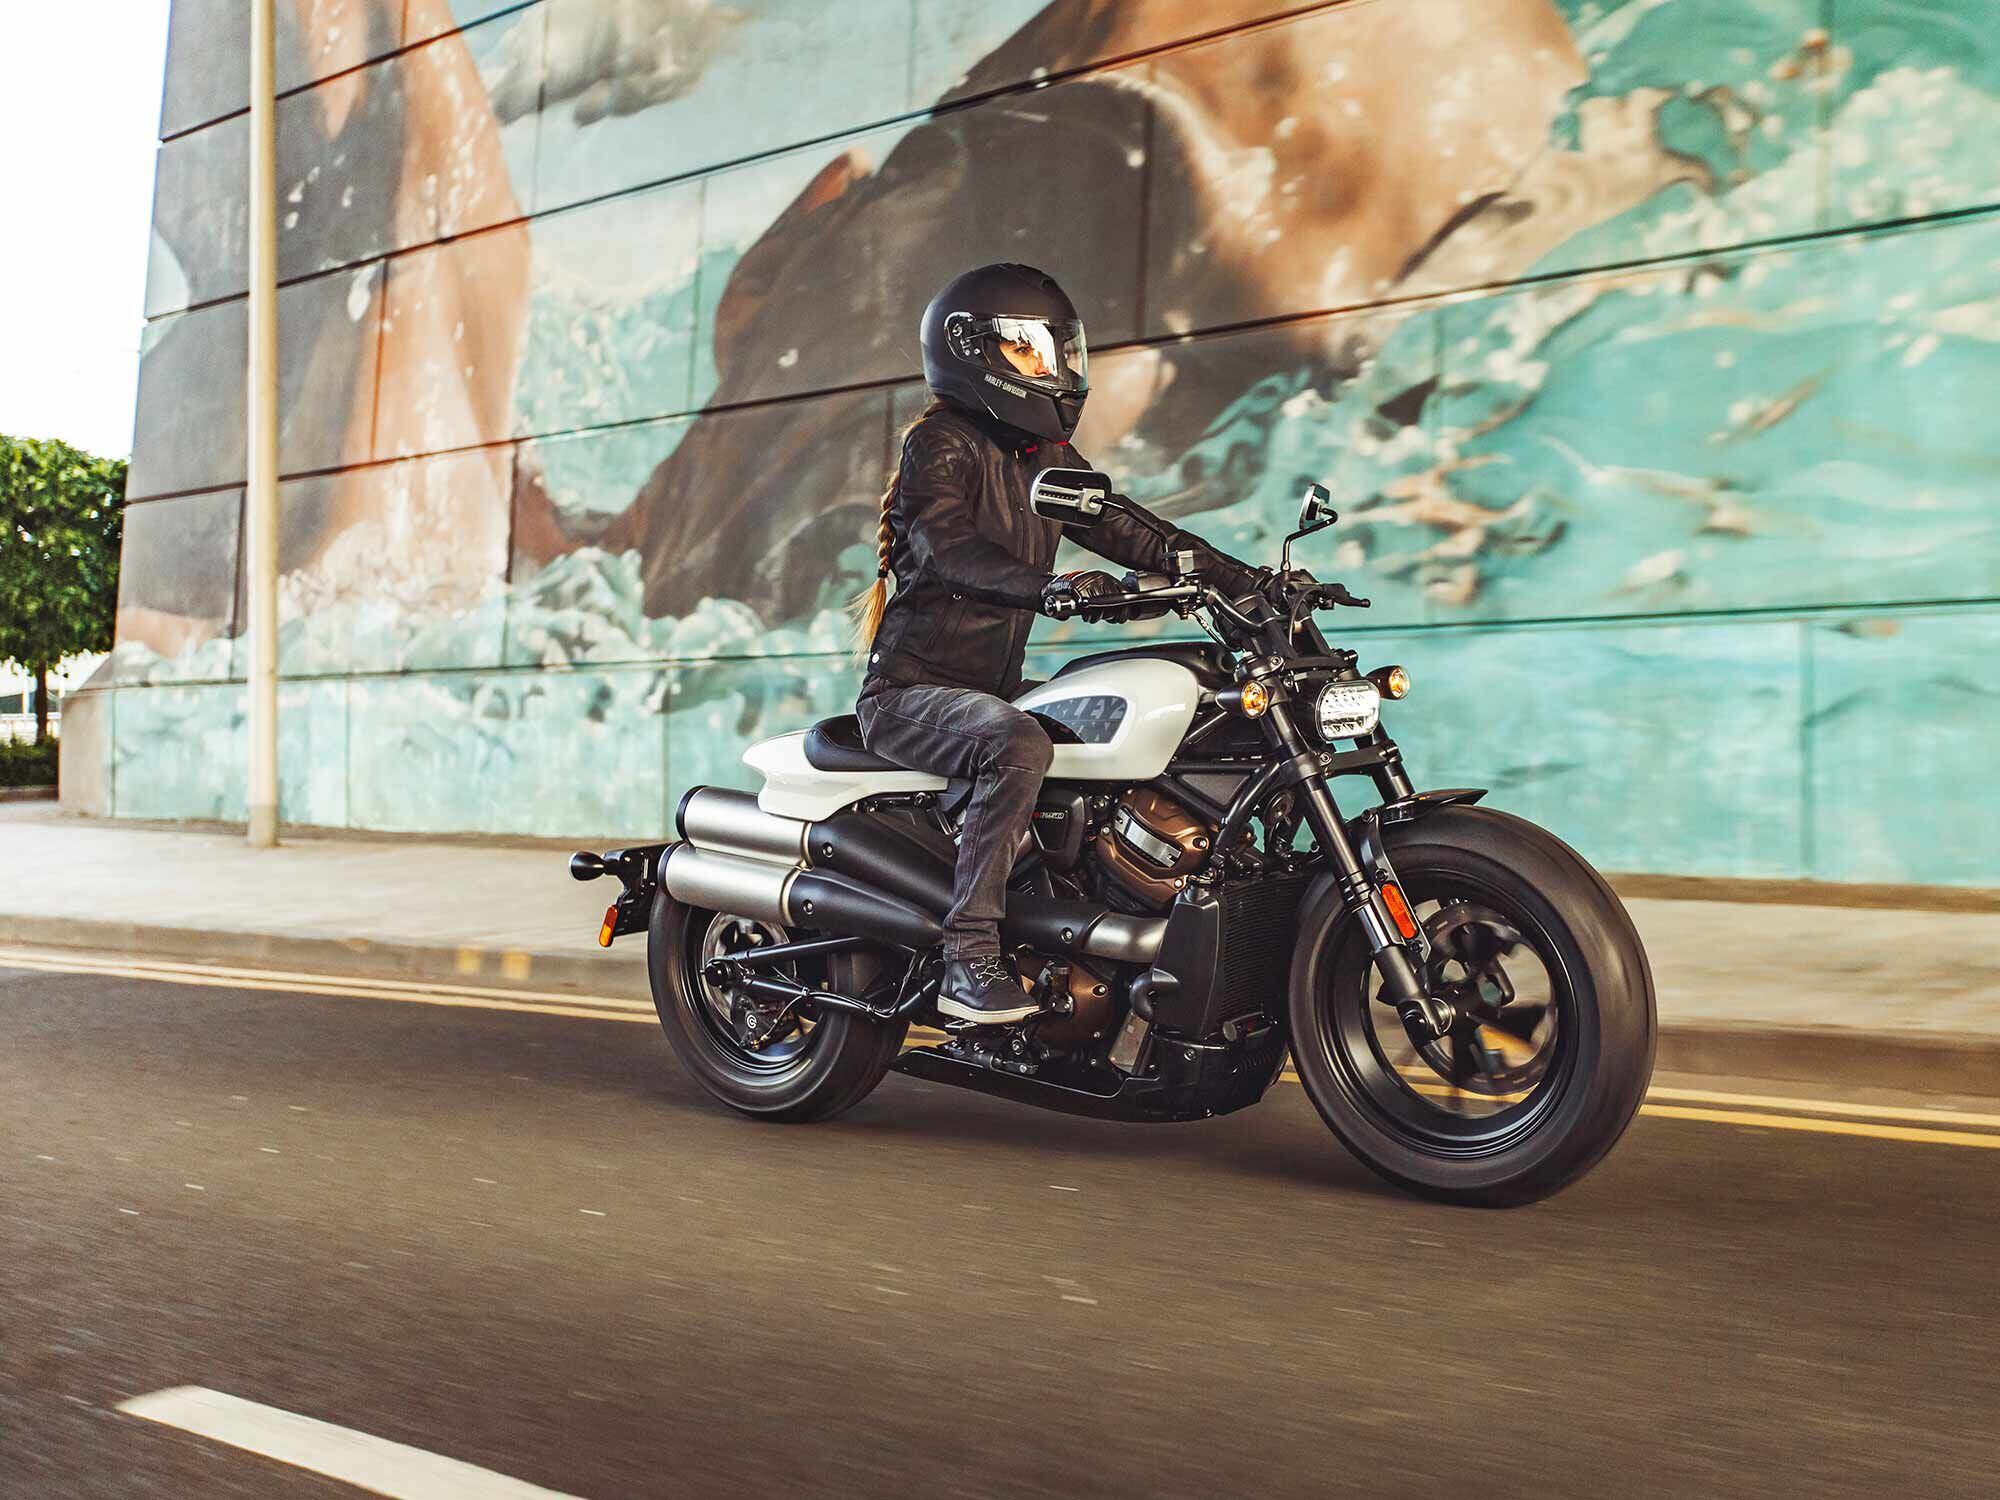 Unlike the Nightster, the Sportster S touts a different version of the Pan America’s Revolution Max 1250T V-twin. The high pipes give it a very different style too.